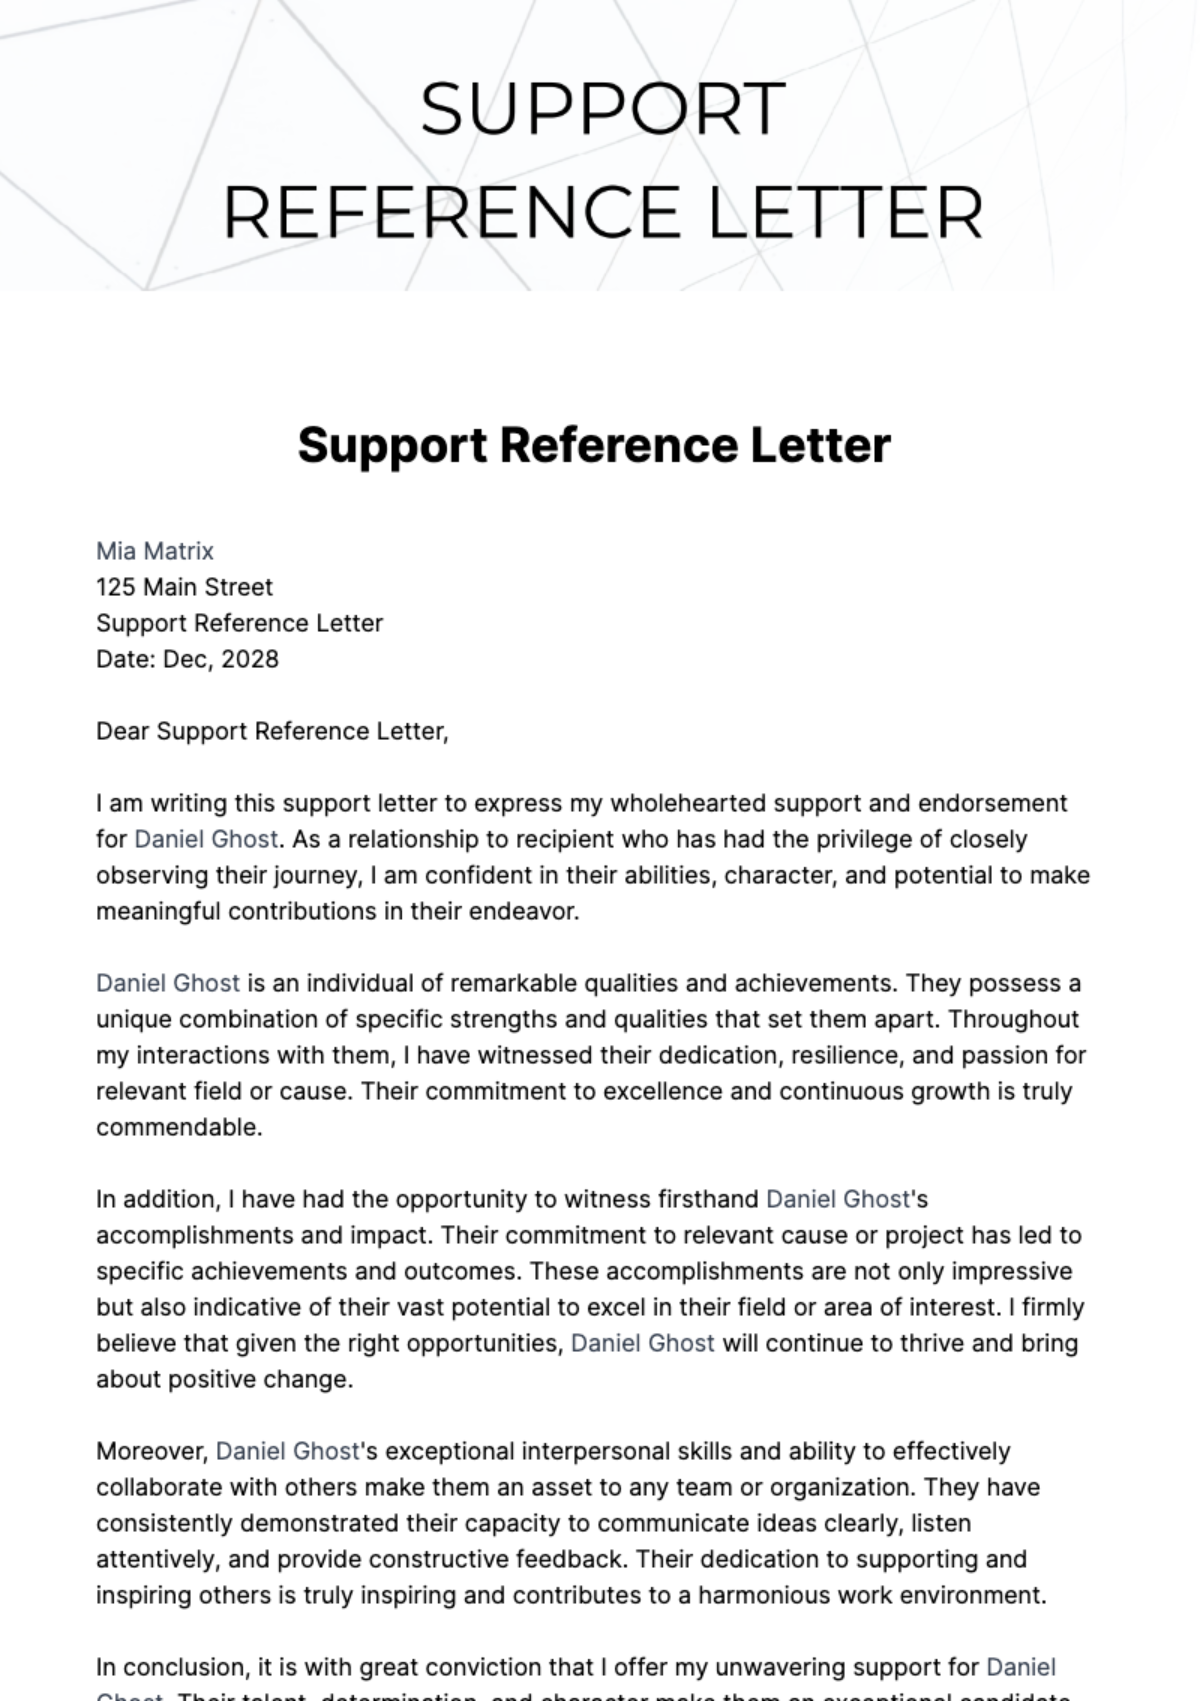 Support Reference Letter Template